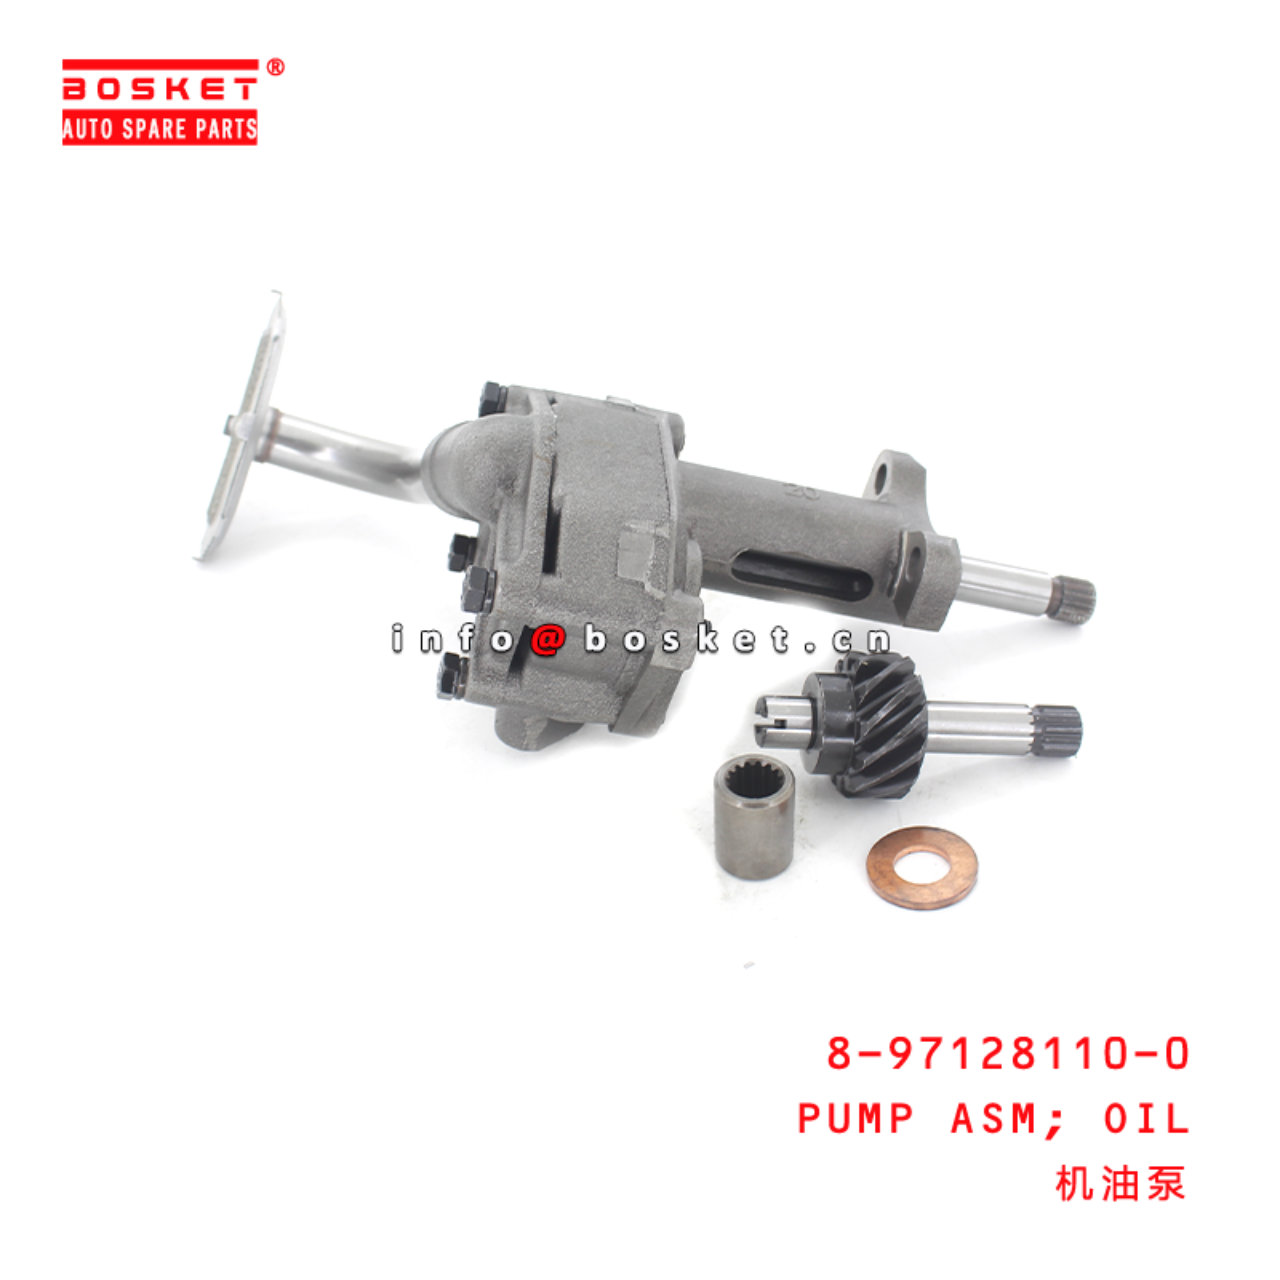 8-97128110-0 Oil Pump Assembly Suitable for ISUZU XD 8971281100